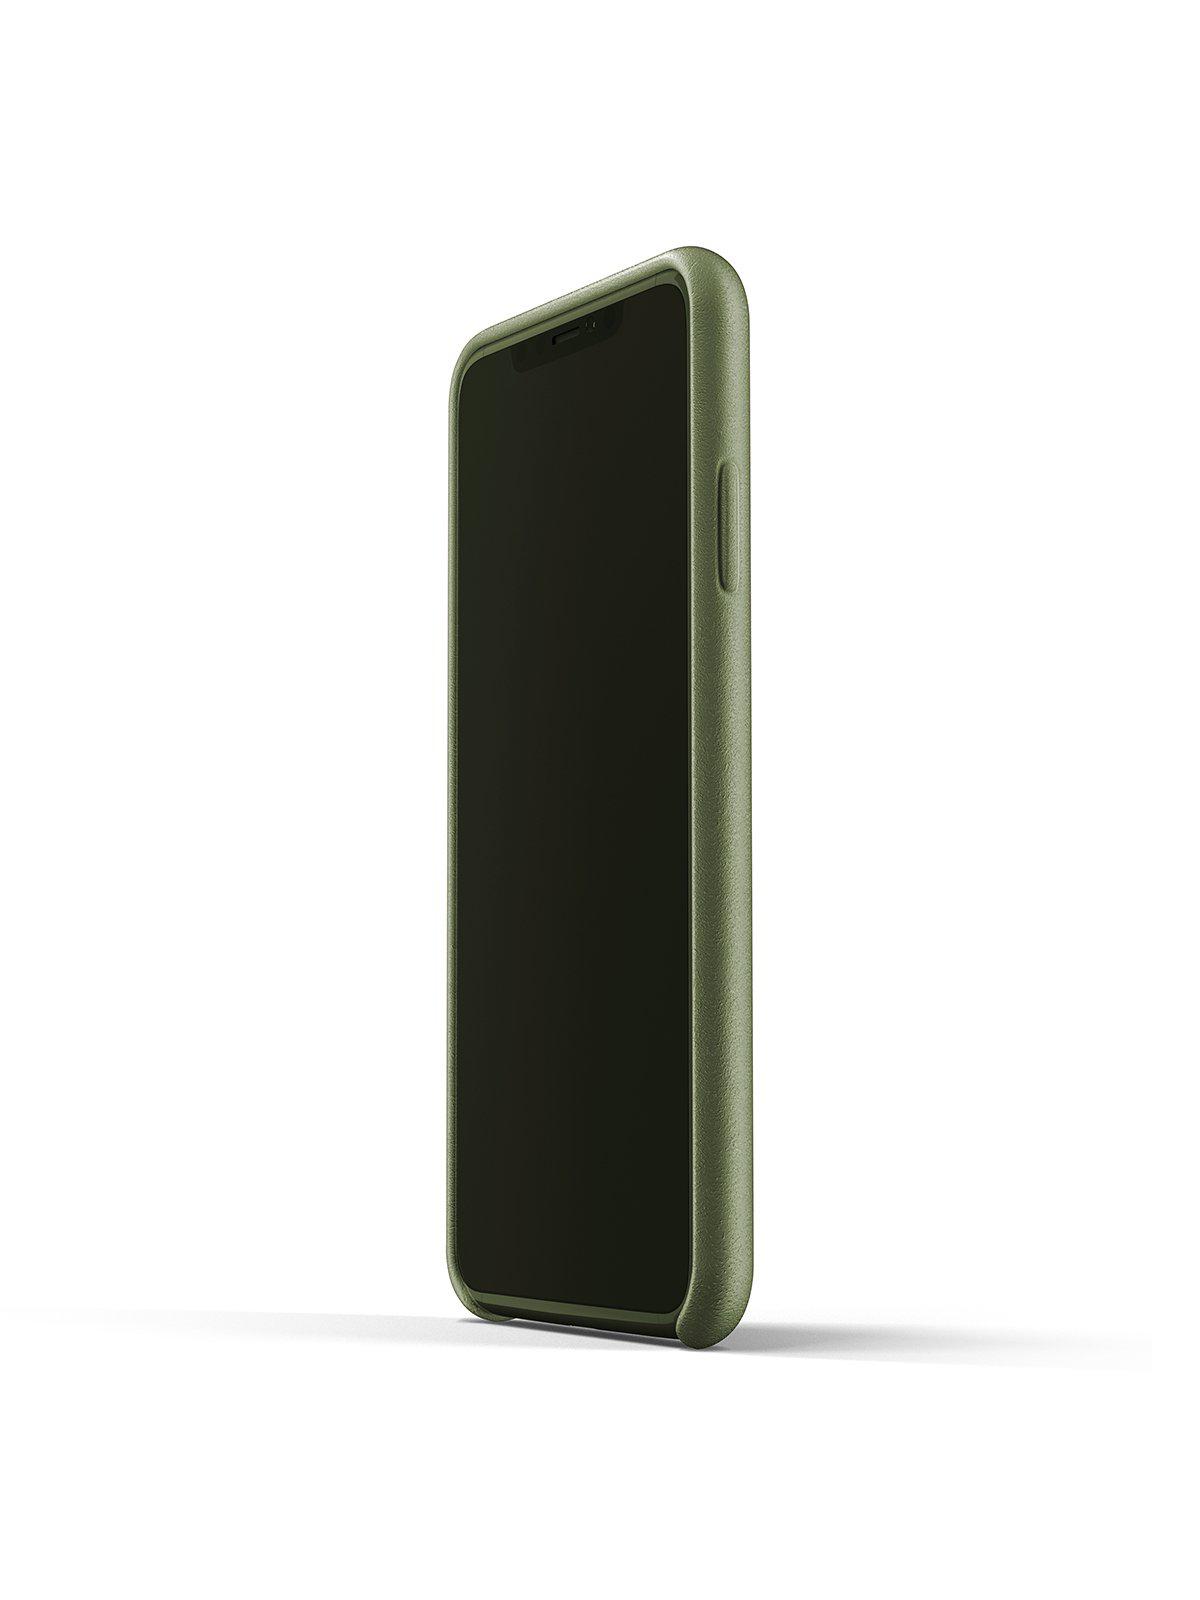 Mujjo Full Leather Case for iPhone XS Max Olive - MORE by Morello Indonesia